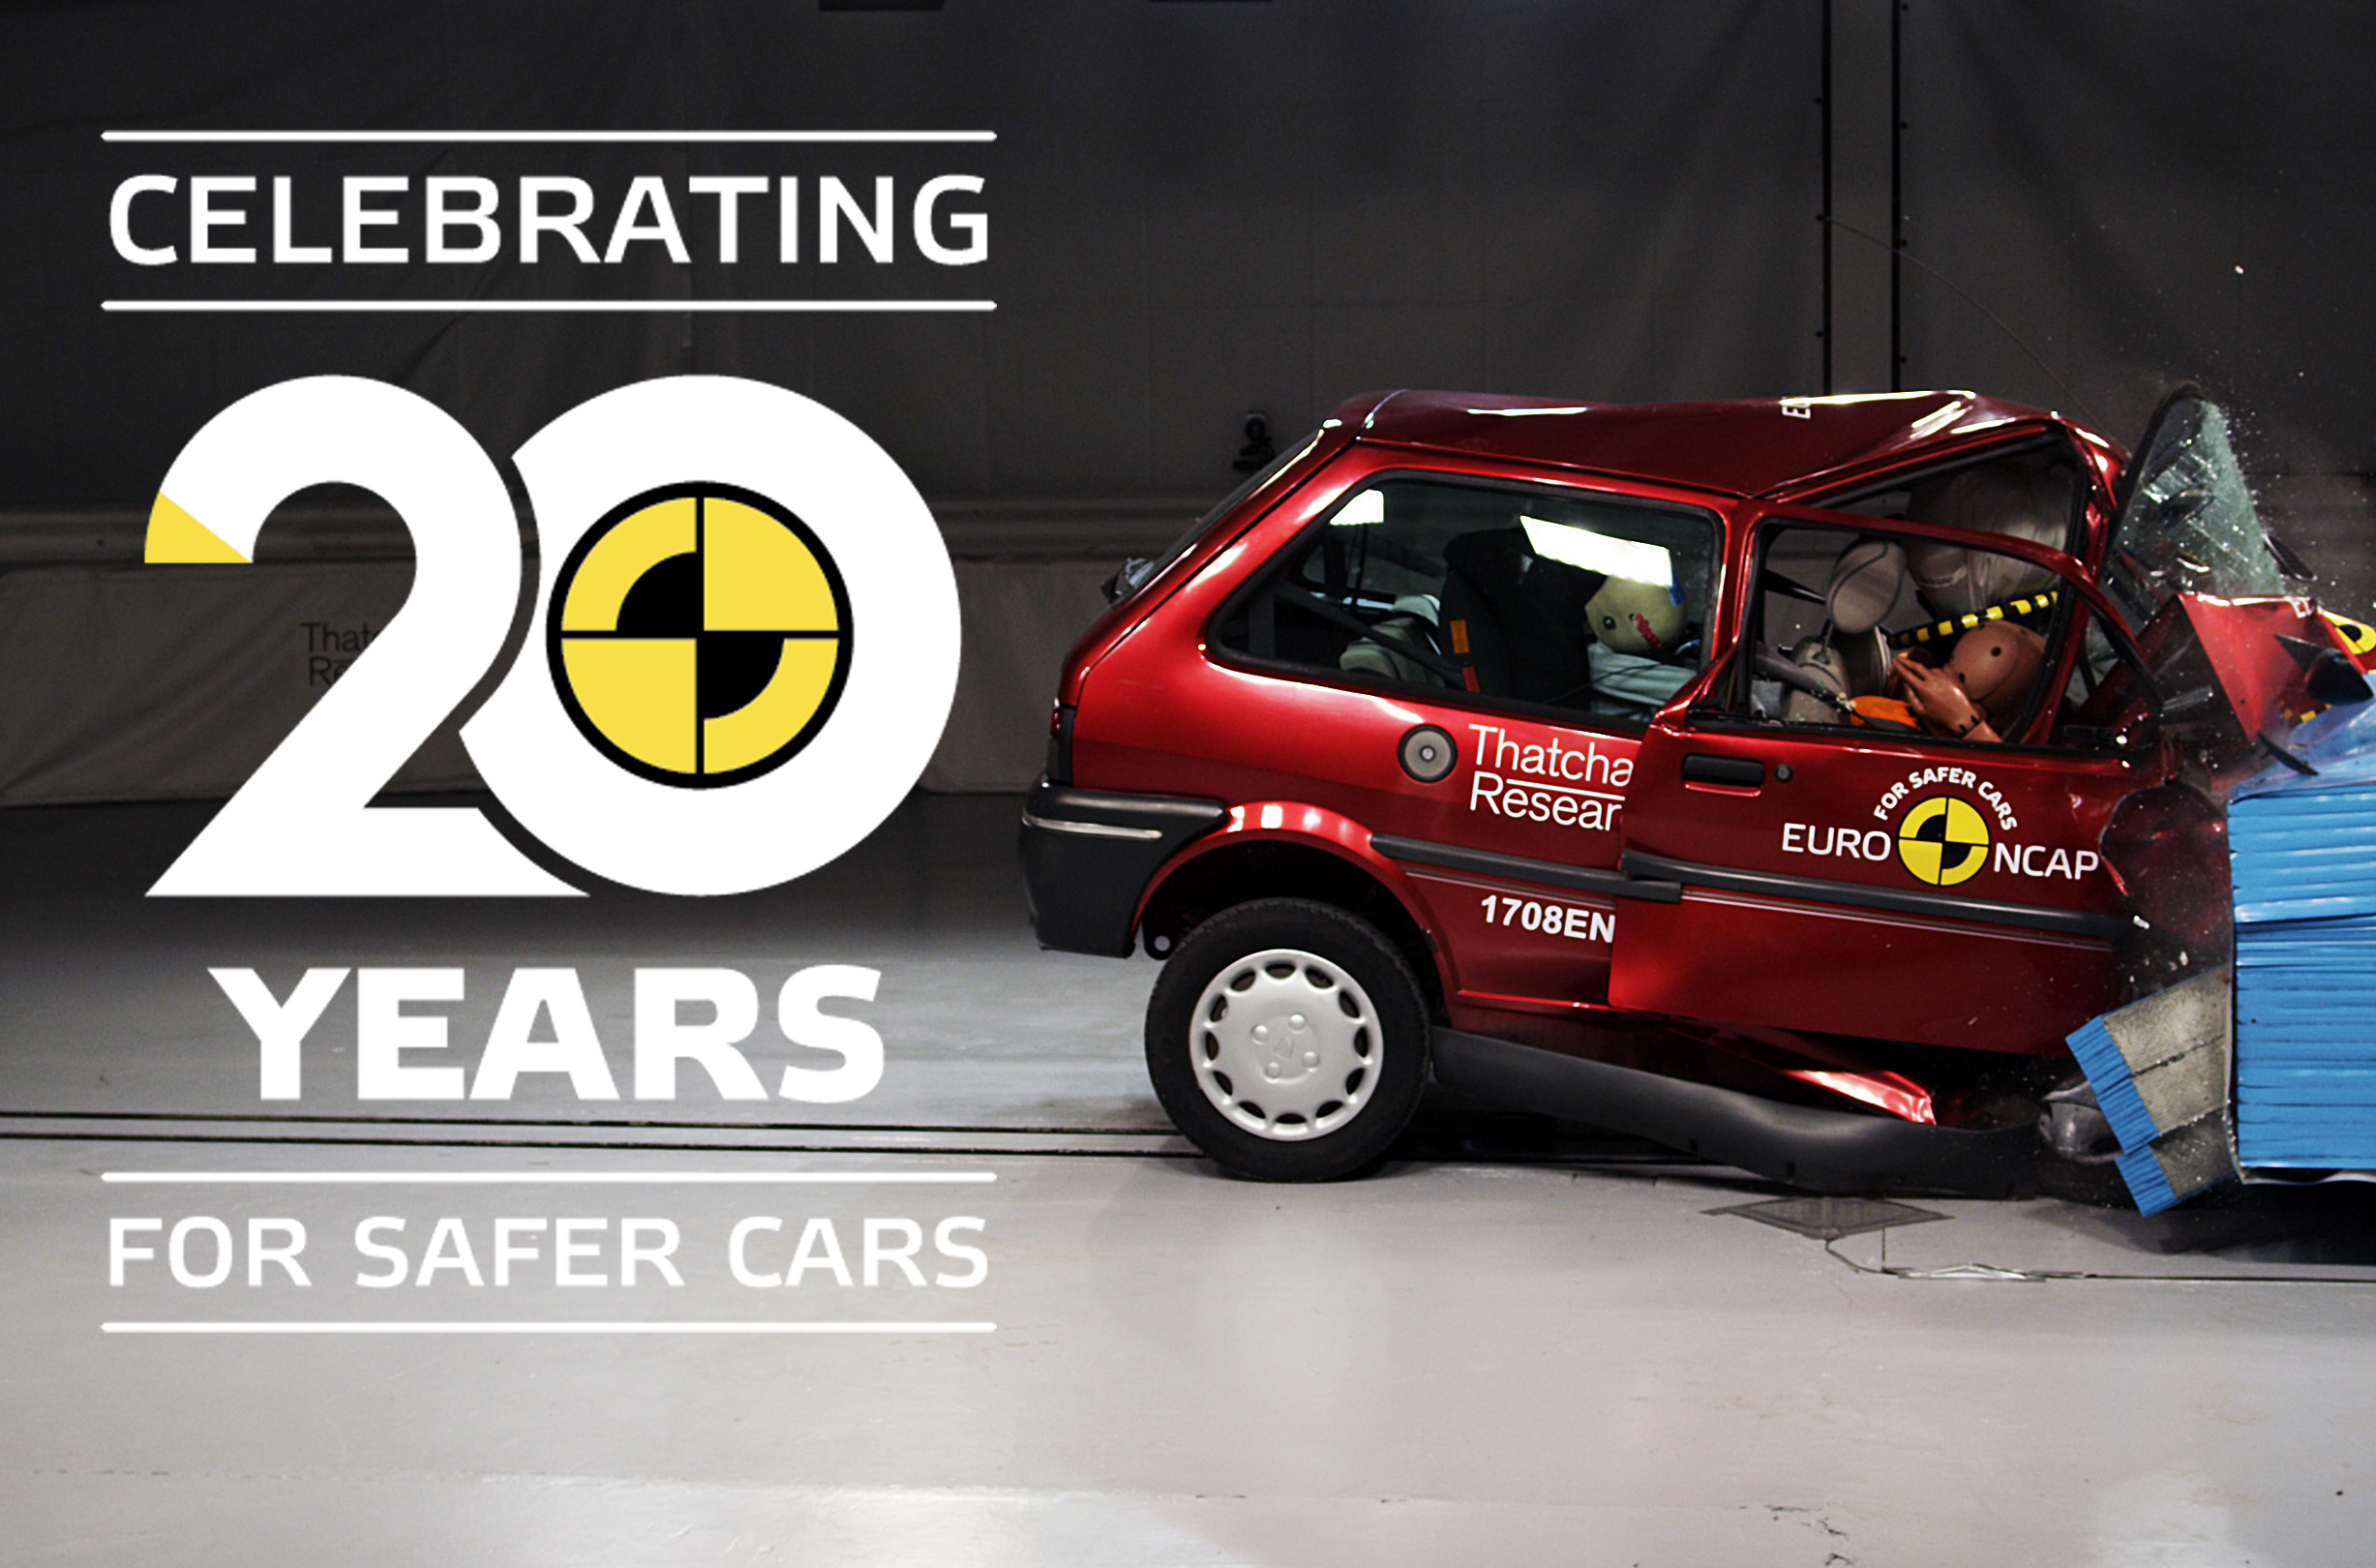 Euro NCAP Newsroom : Renault Austral - Euro NCAP 2023 Assisted Driving  Results - Very Good grading